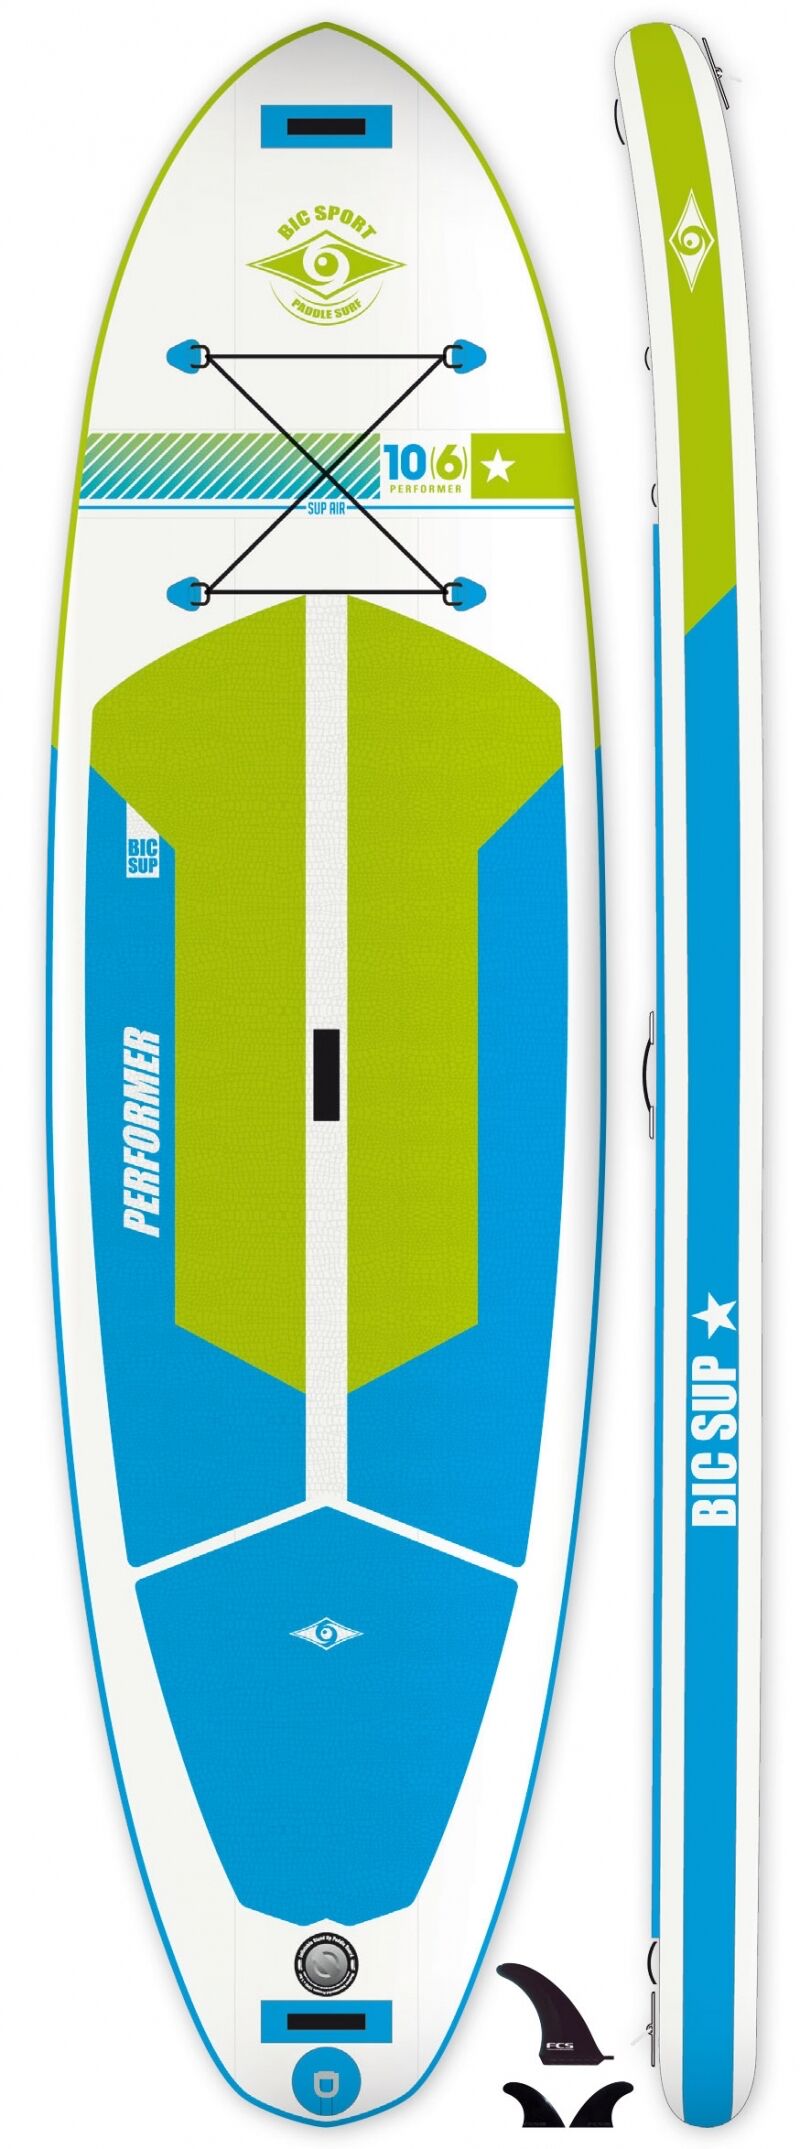 Tahe Outdoor 10'6" Performer Air - Uppblåsbar Stand Up Paddle